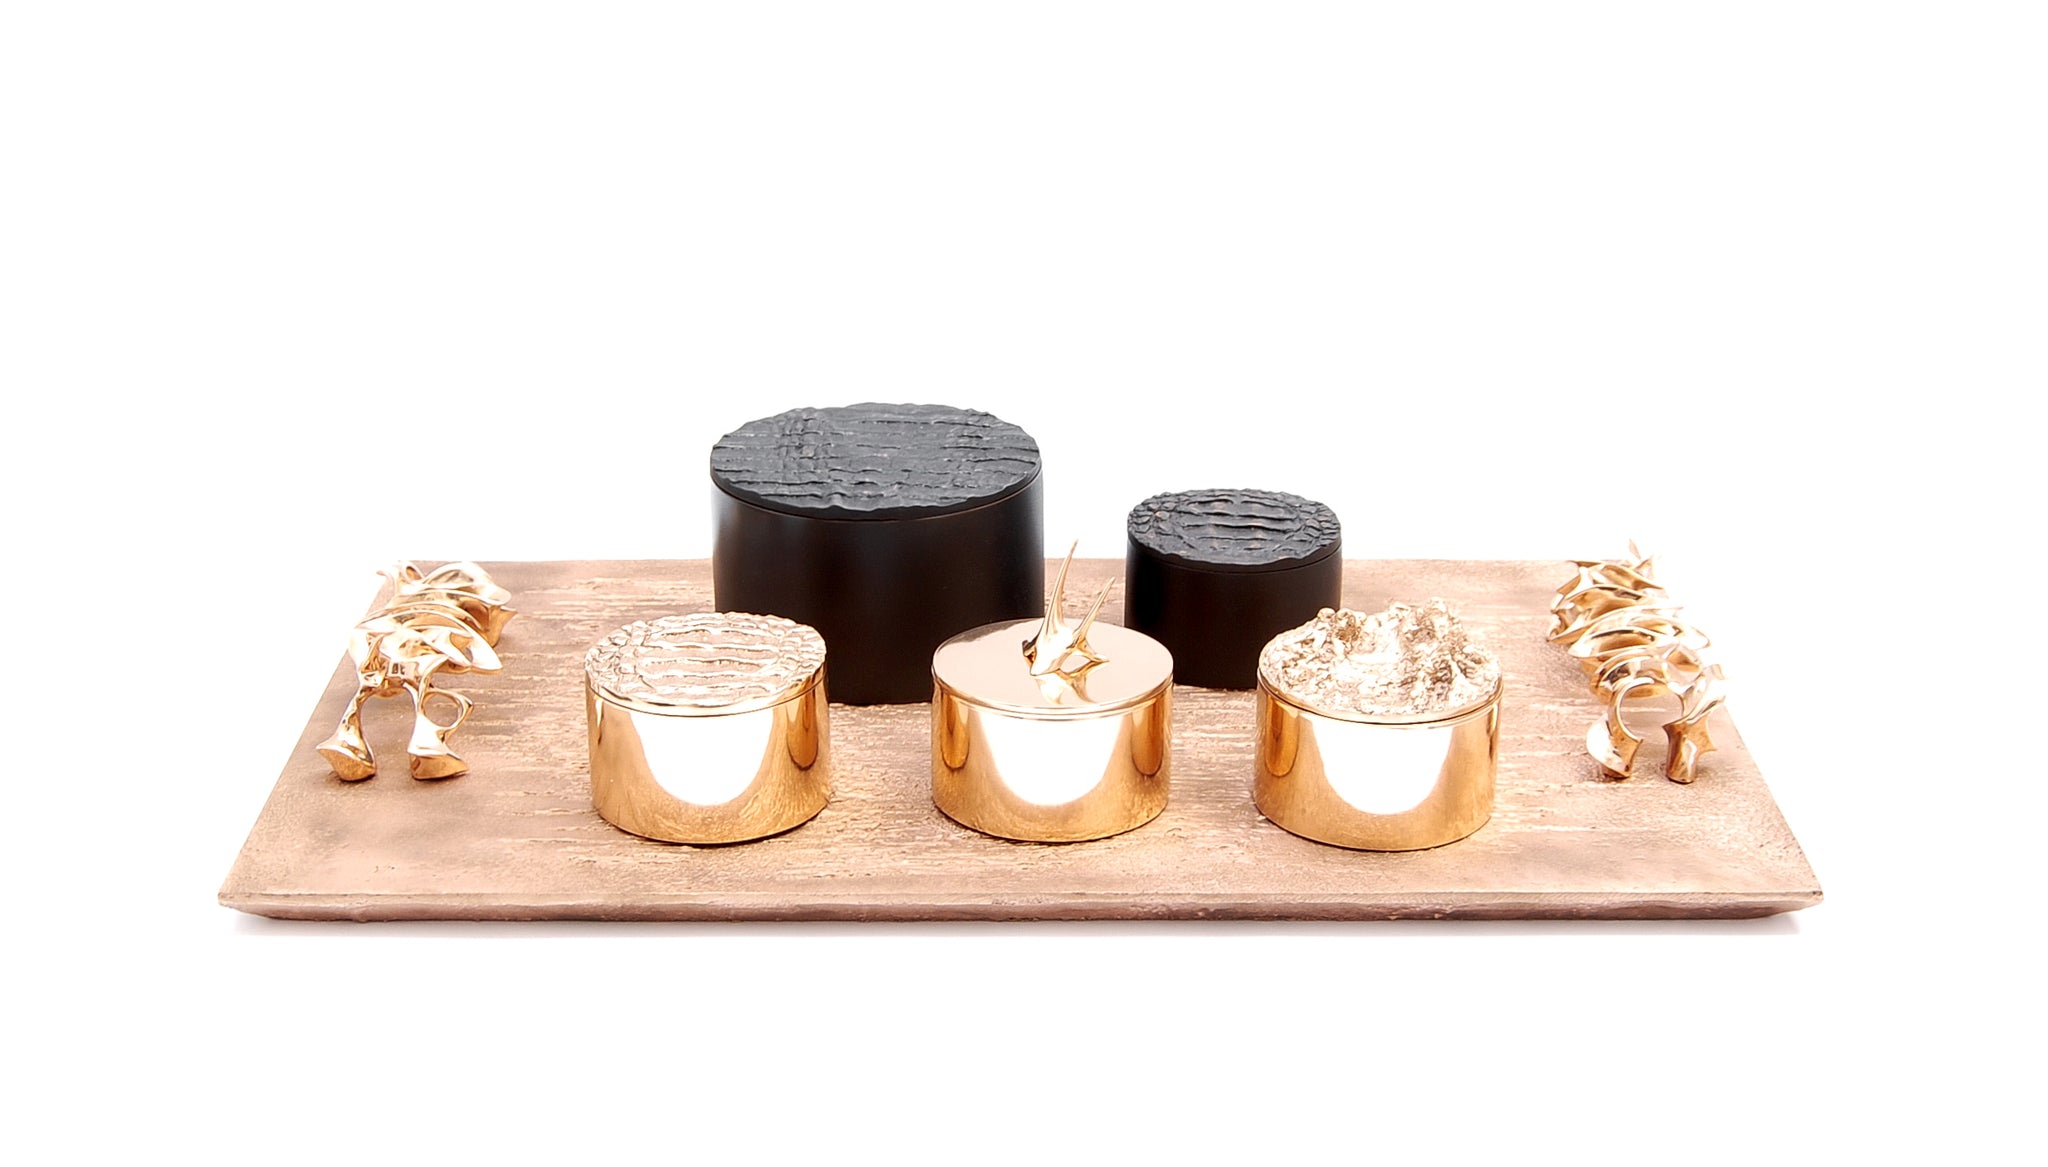 MARIAE<br><br>BAR TRAY / CENTERPIECE / CANDLE TRAY<br><br>POLISHED BRONZE